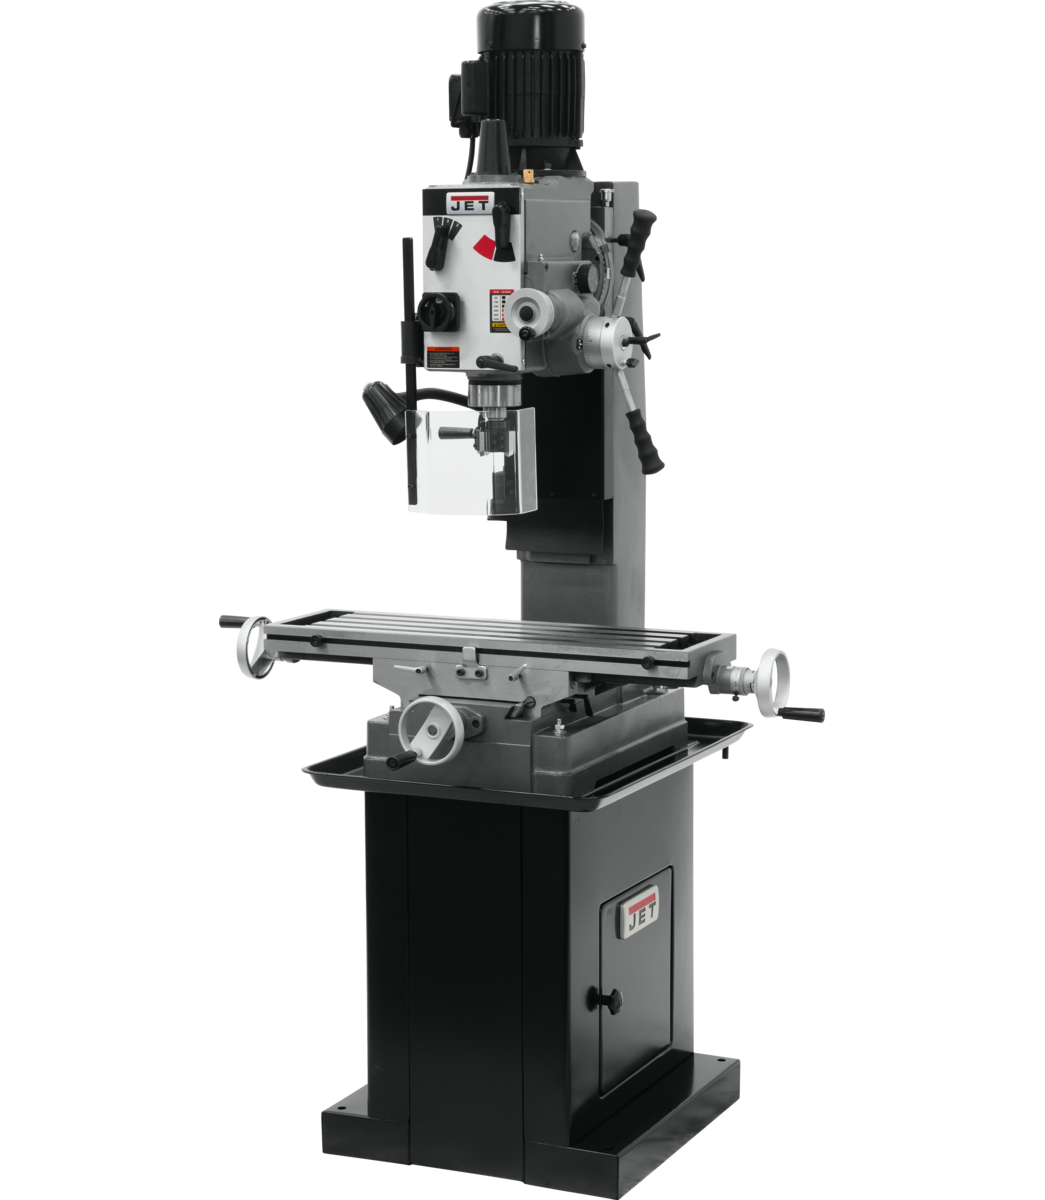 351153, JMD-45GHPF, Geared Head Square Column Mill Drill with Power Downfeed with DP700 2-Axis DRO & X-Axis Powerfeed